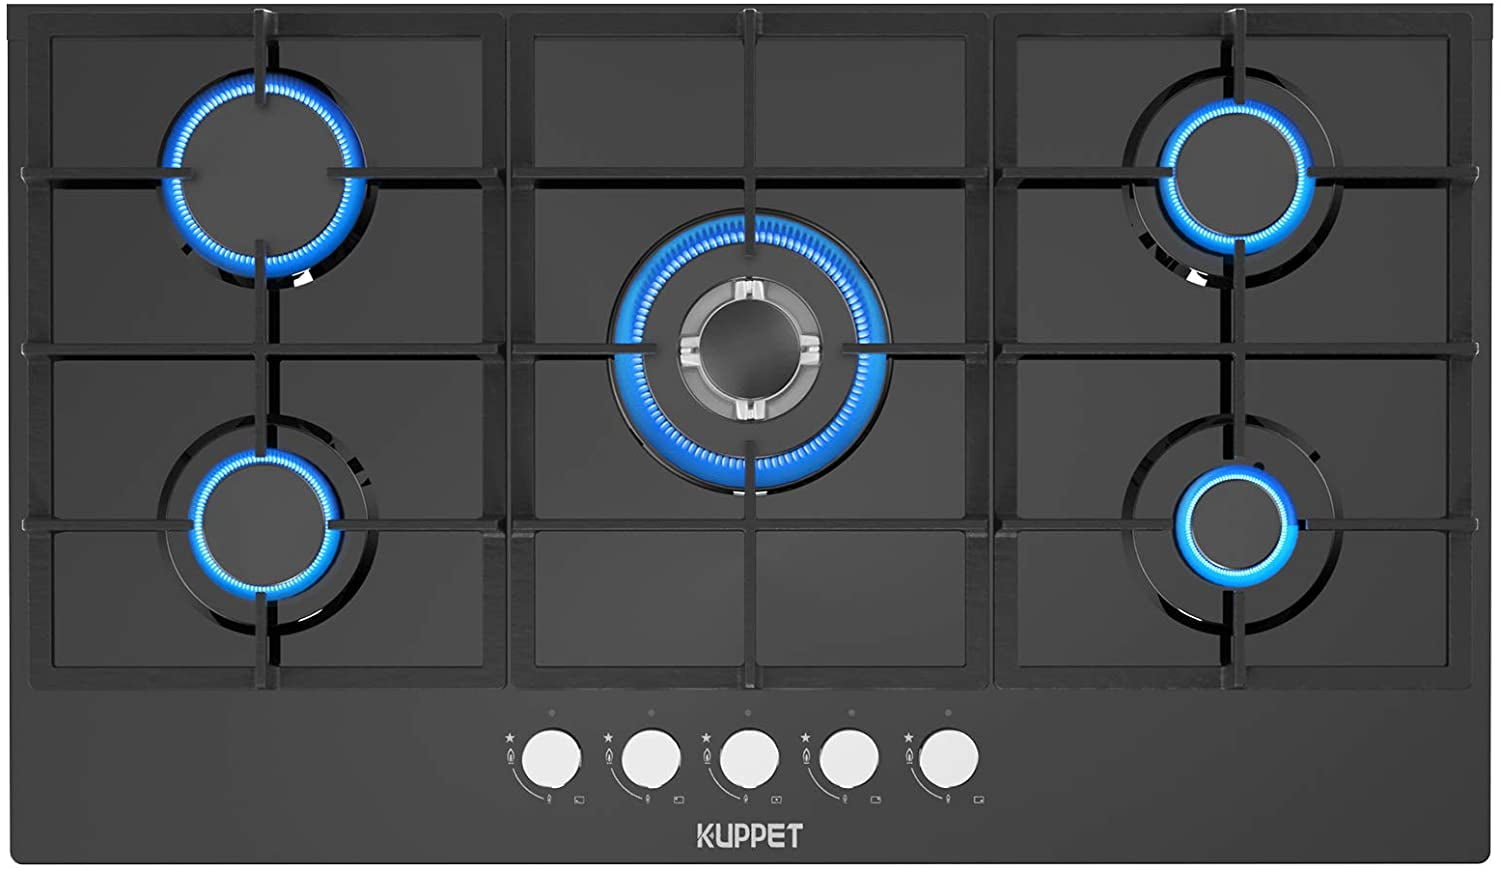 NG/LPG Convertible ETL Certified 36 Built-in Gas Cooktop KUPPET QB5903 Gas Stove with 5 Booster Burners Smooth Surface Black Tempered Glass 5 Italy Sabaf Sealed Burners 